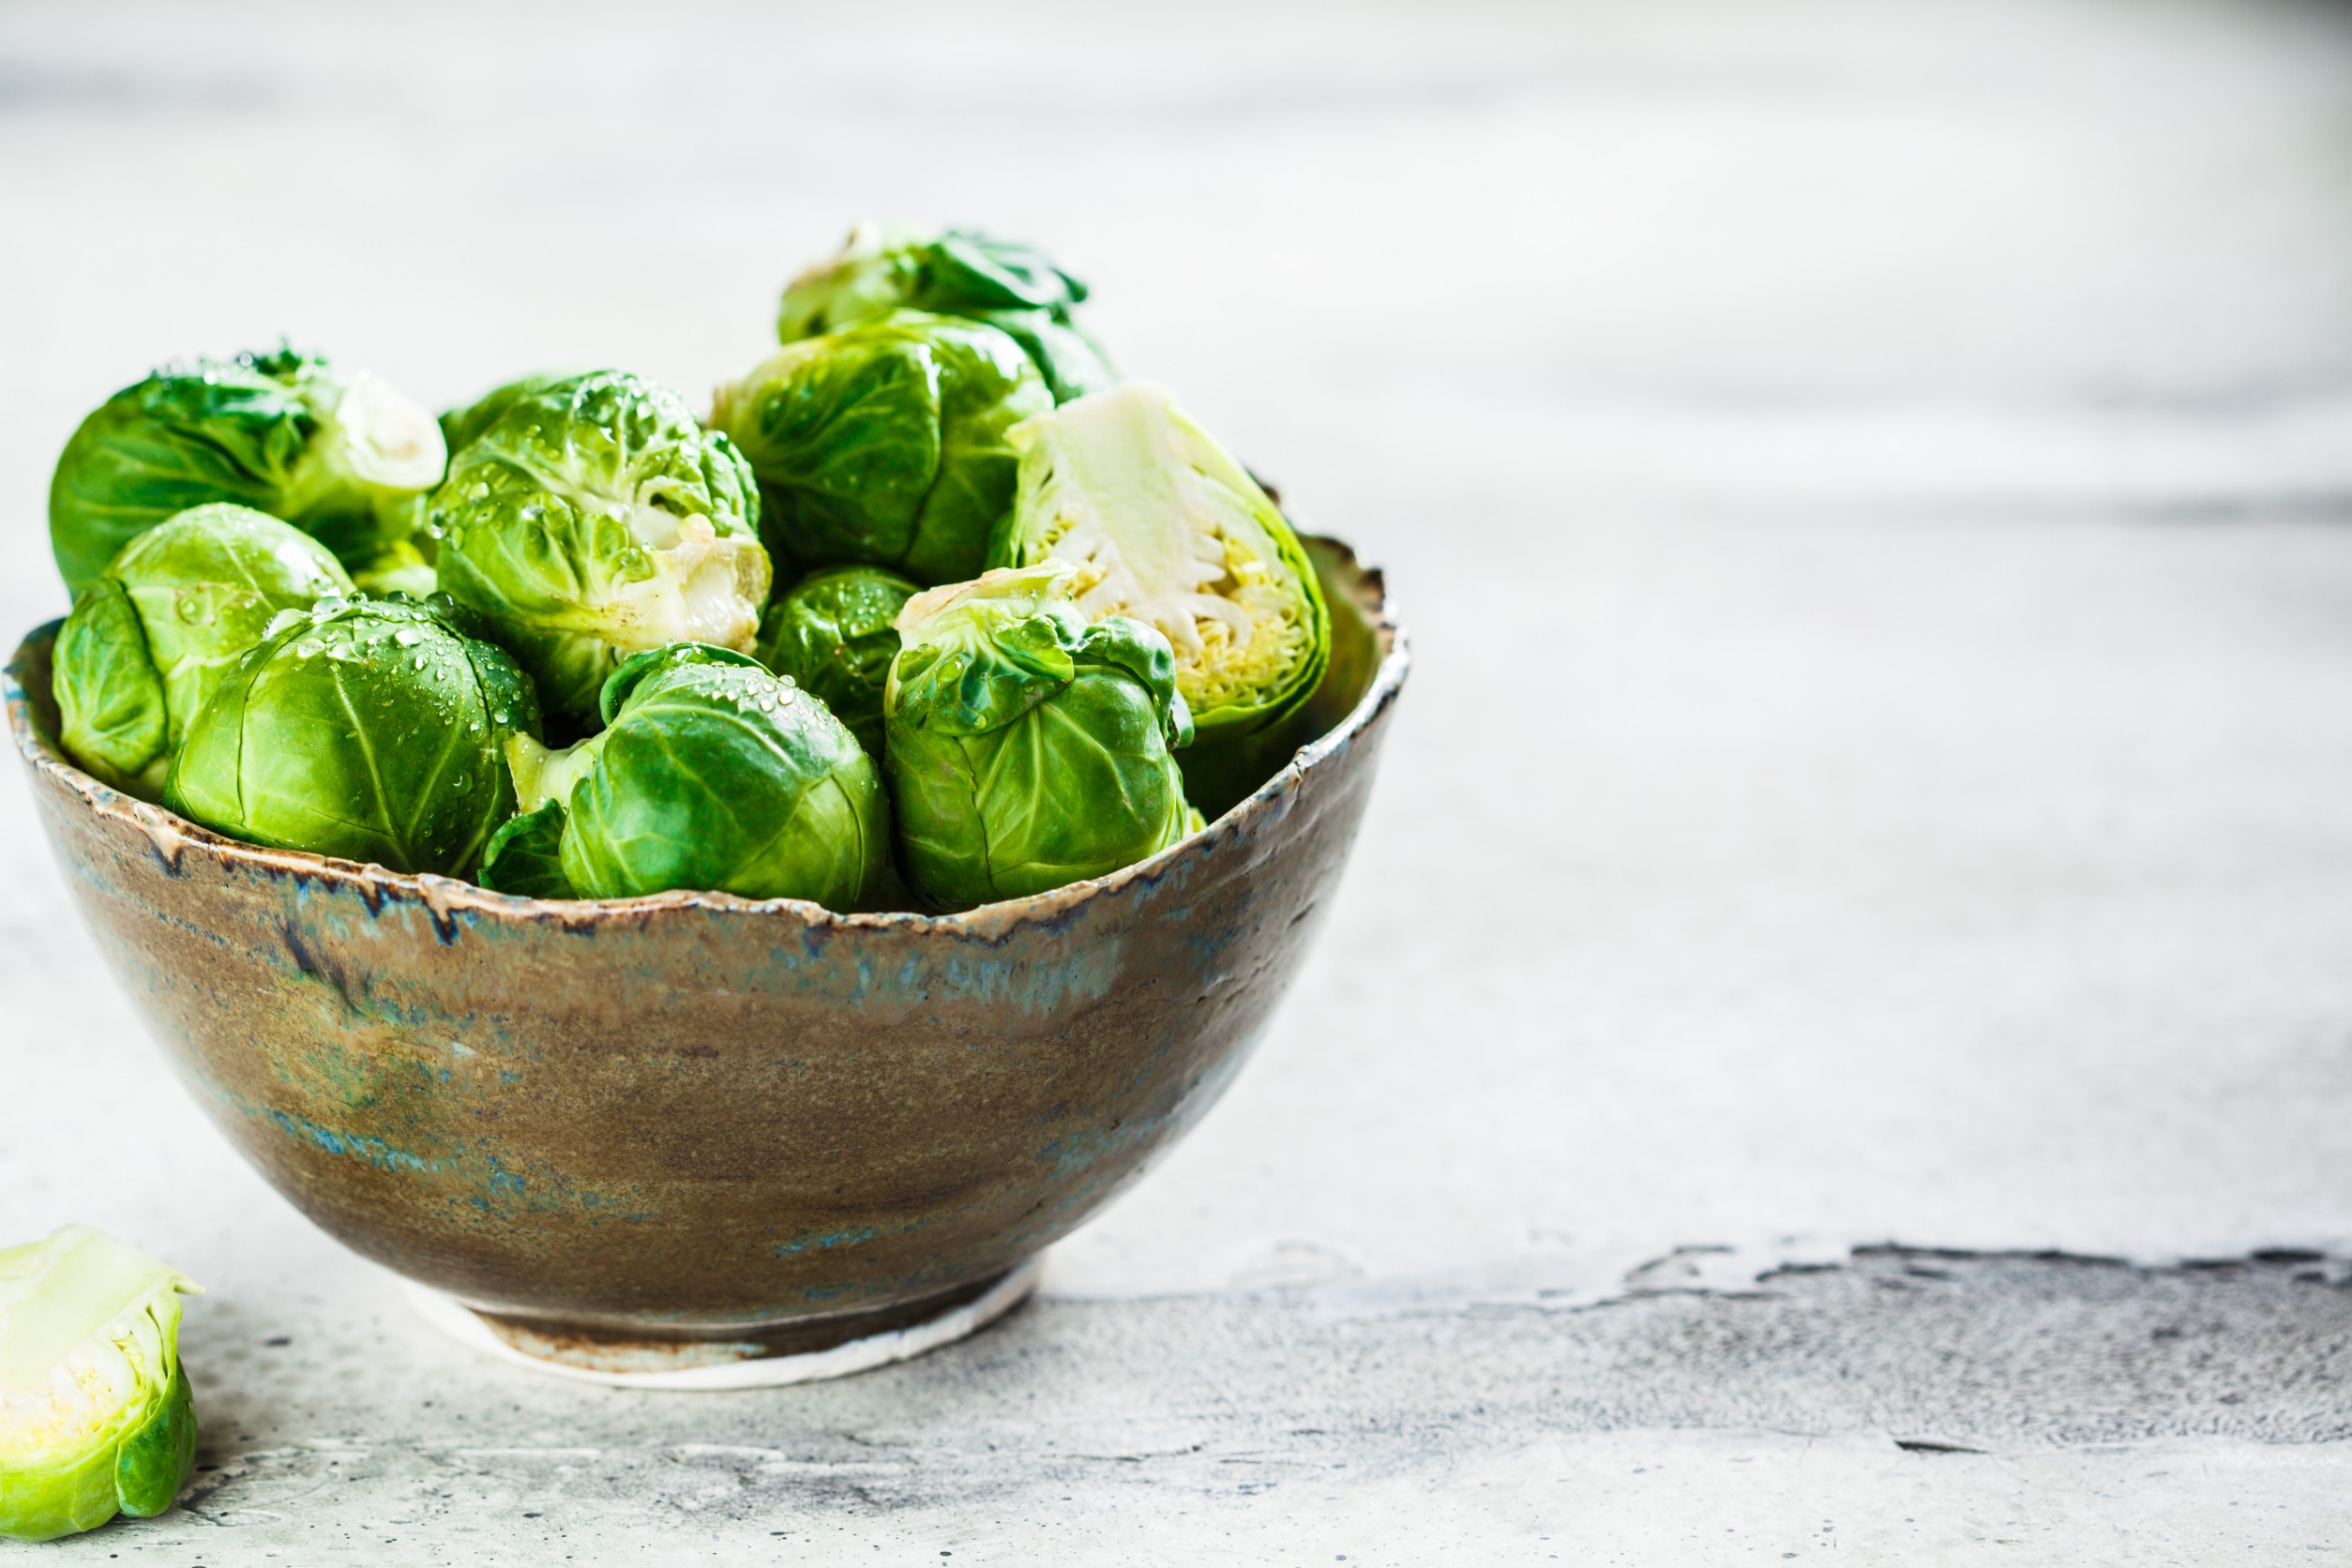 Brussels sprouts salad